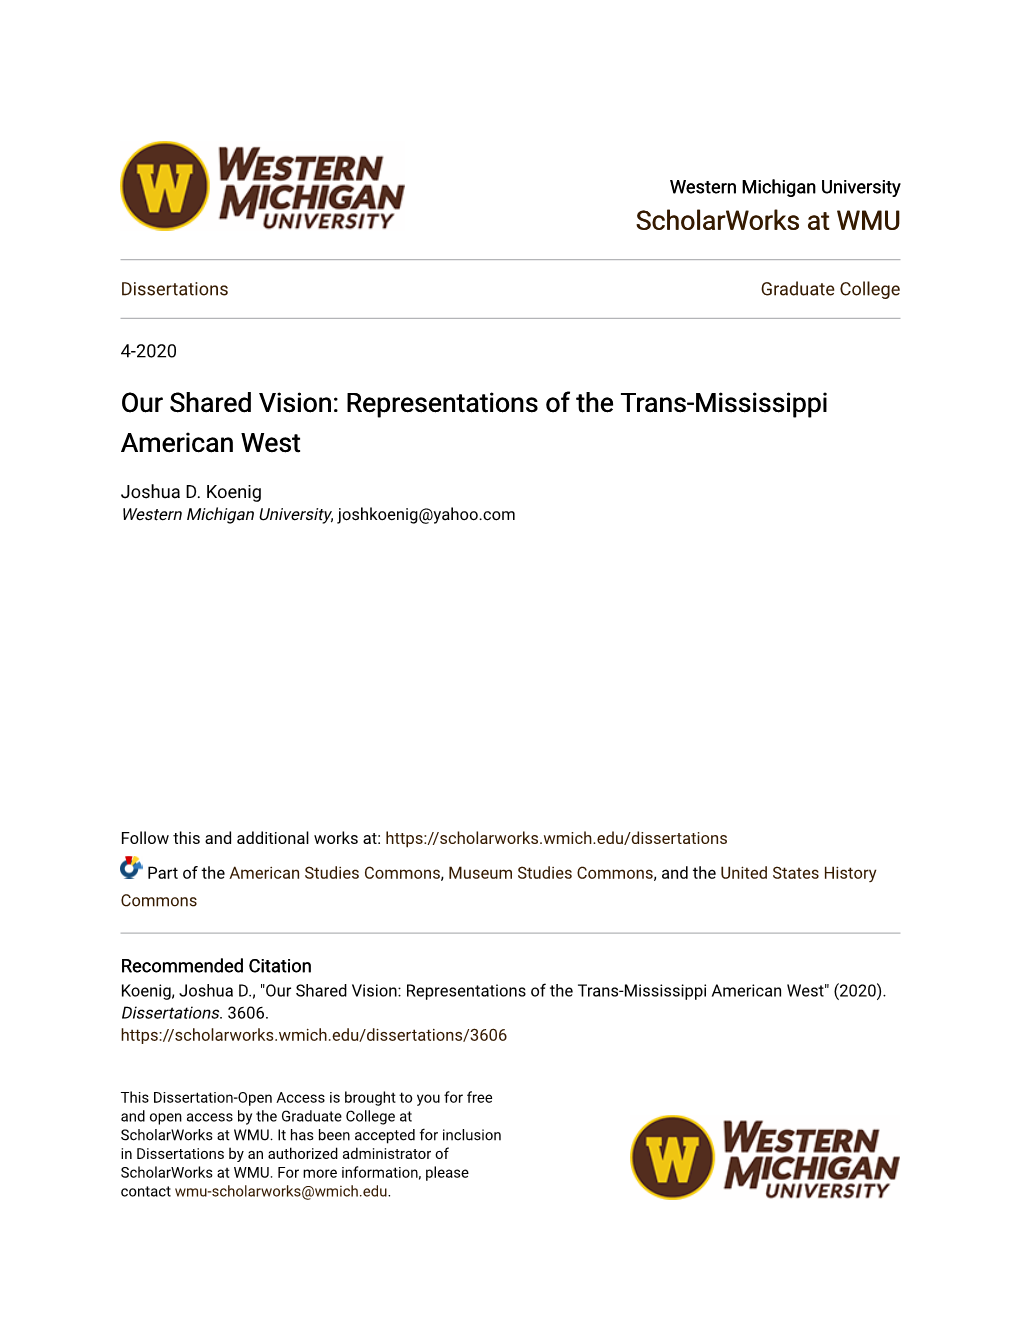 Our Shared Vision: Representations of the Trans-Mississippi American West